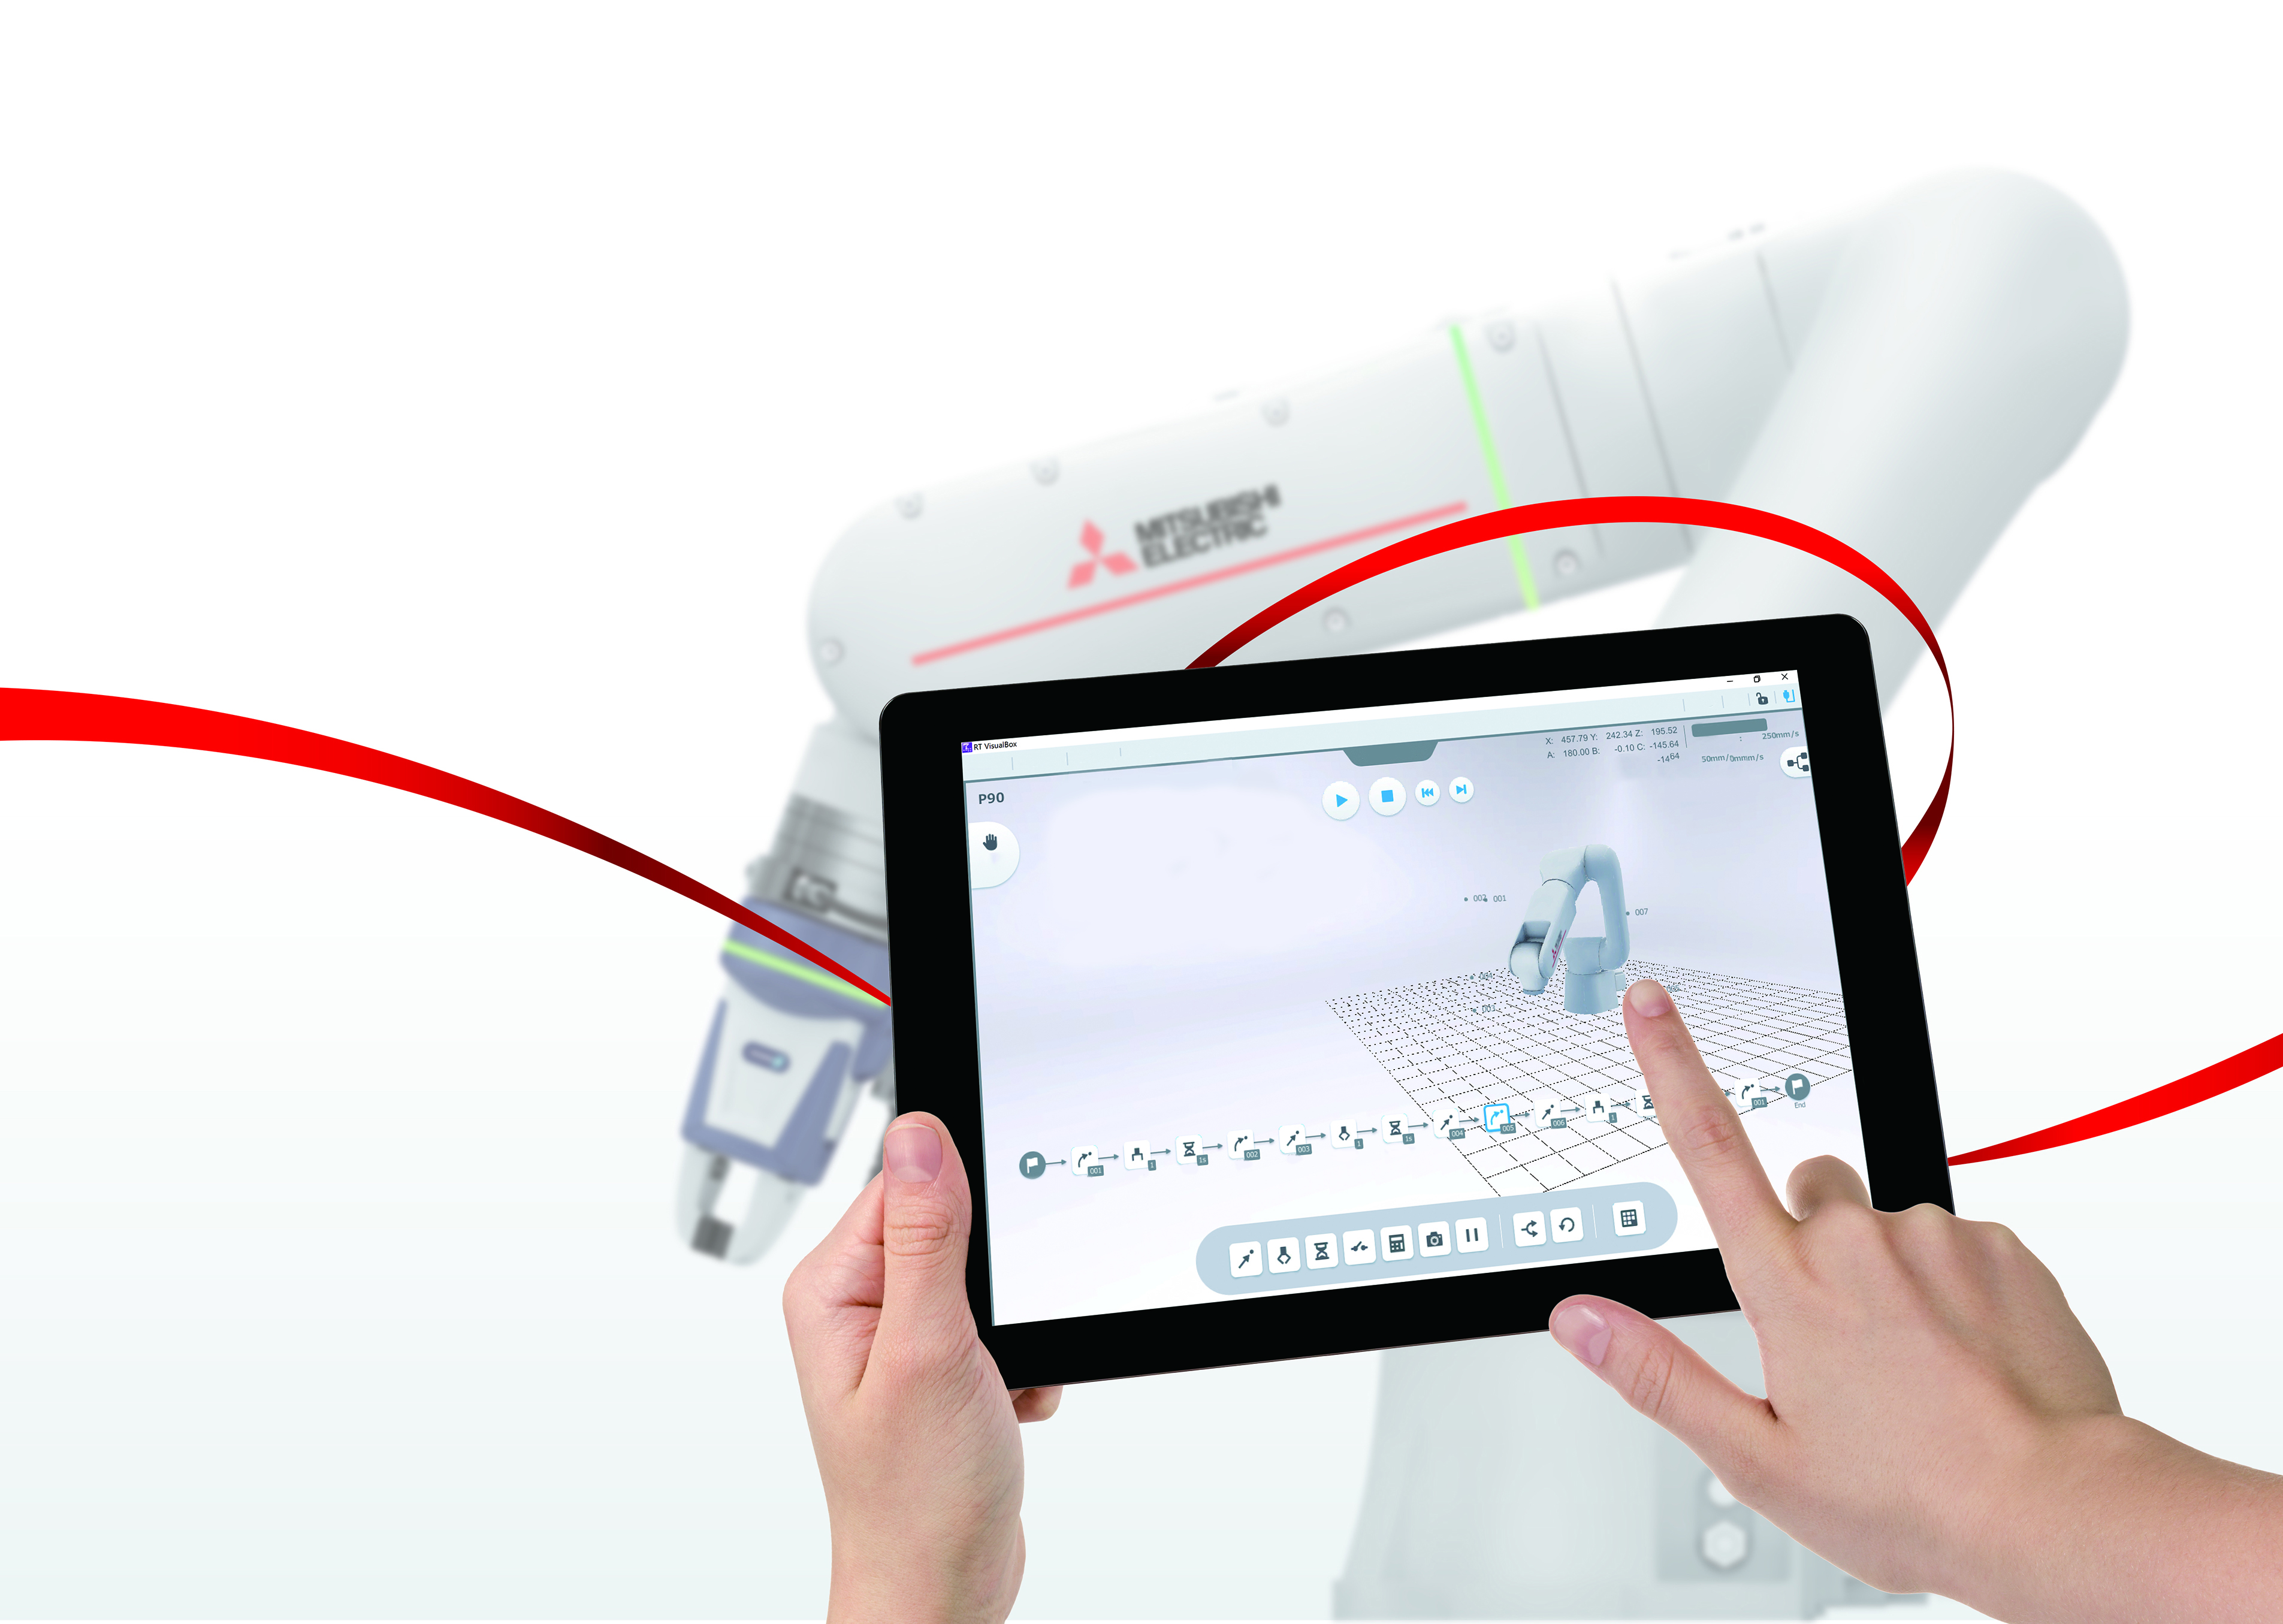 The latest update to Mitsubishi Electric’s RT Toolbox3 and iQ Works2 offers a new visual editor for programming SCADA and six-axis industrial robots. [Source: Mitsubishi Electric Europe B.V.]